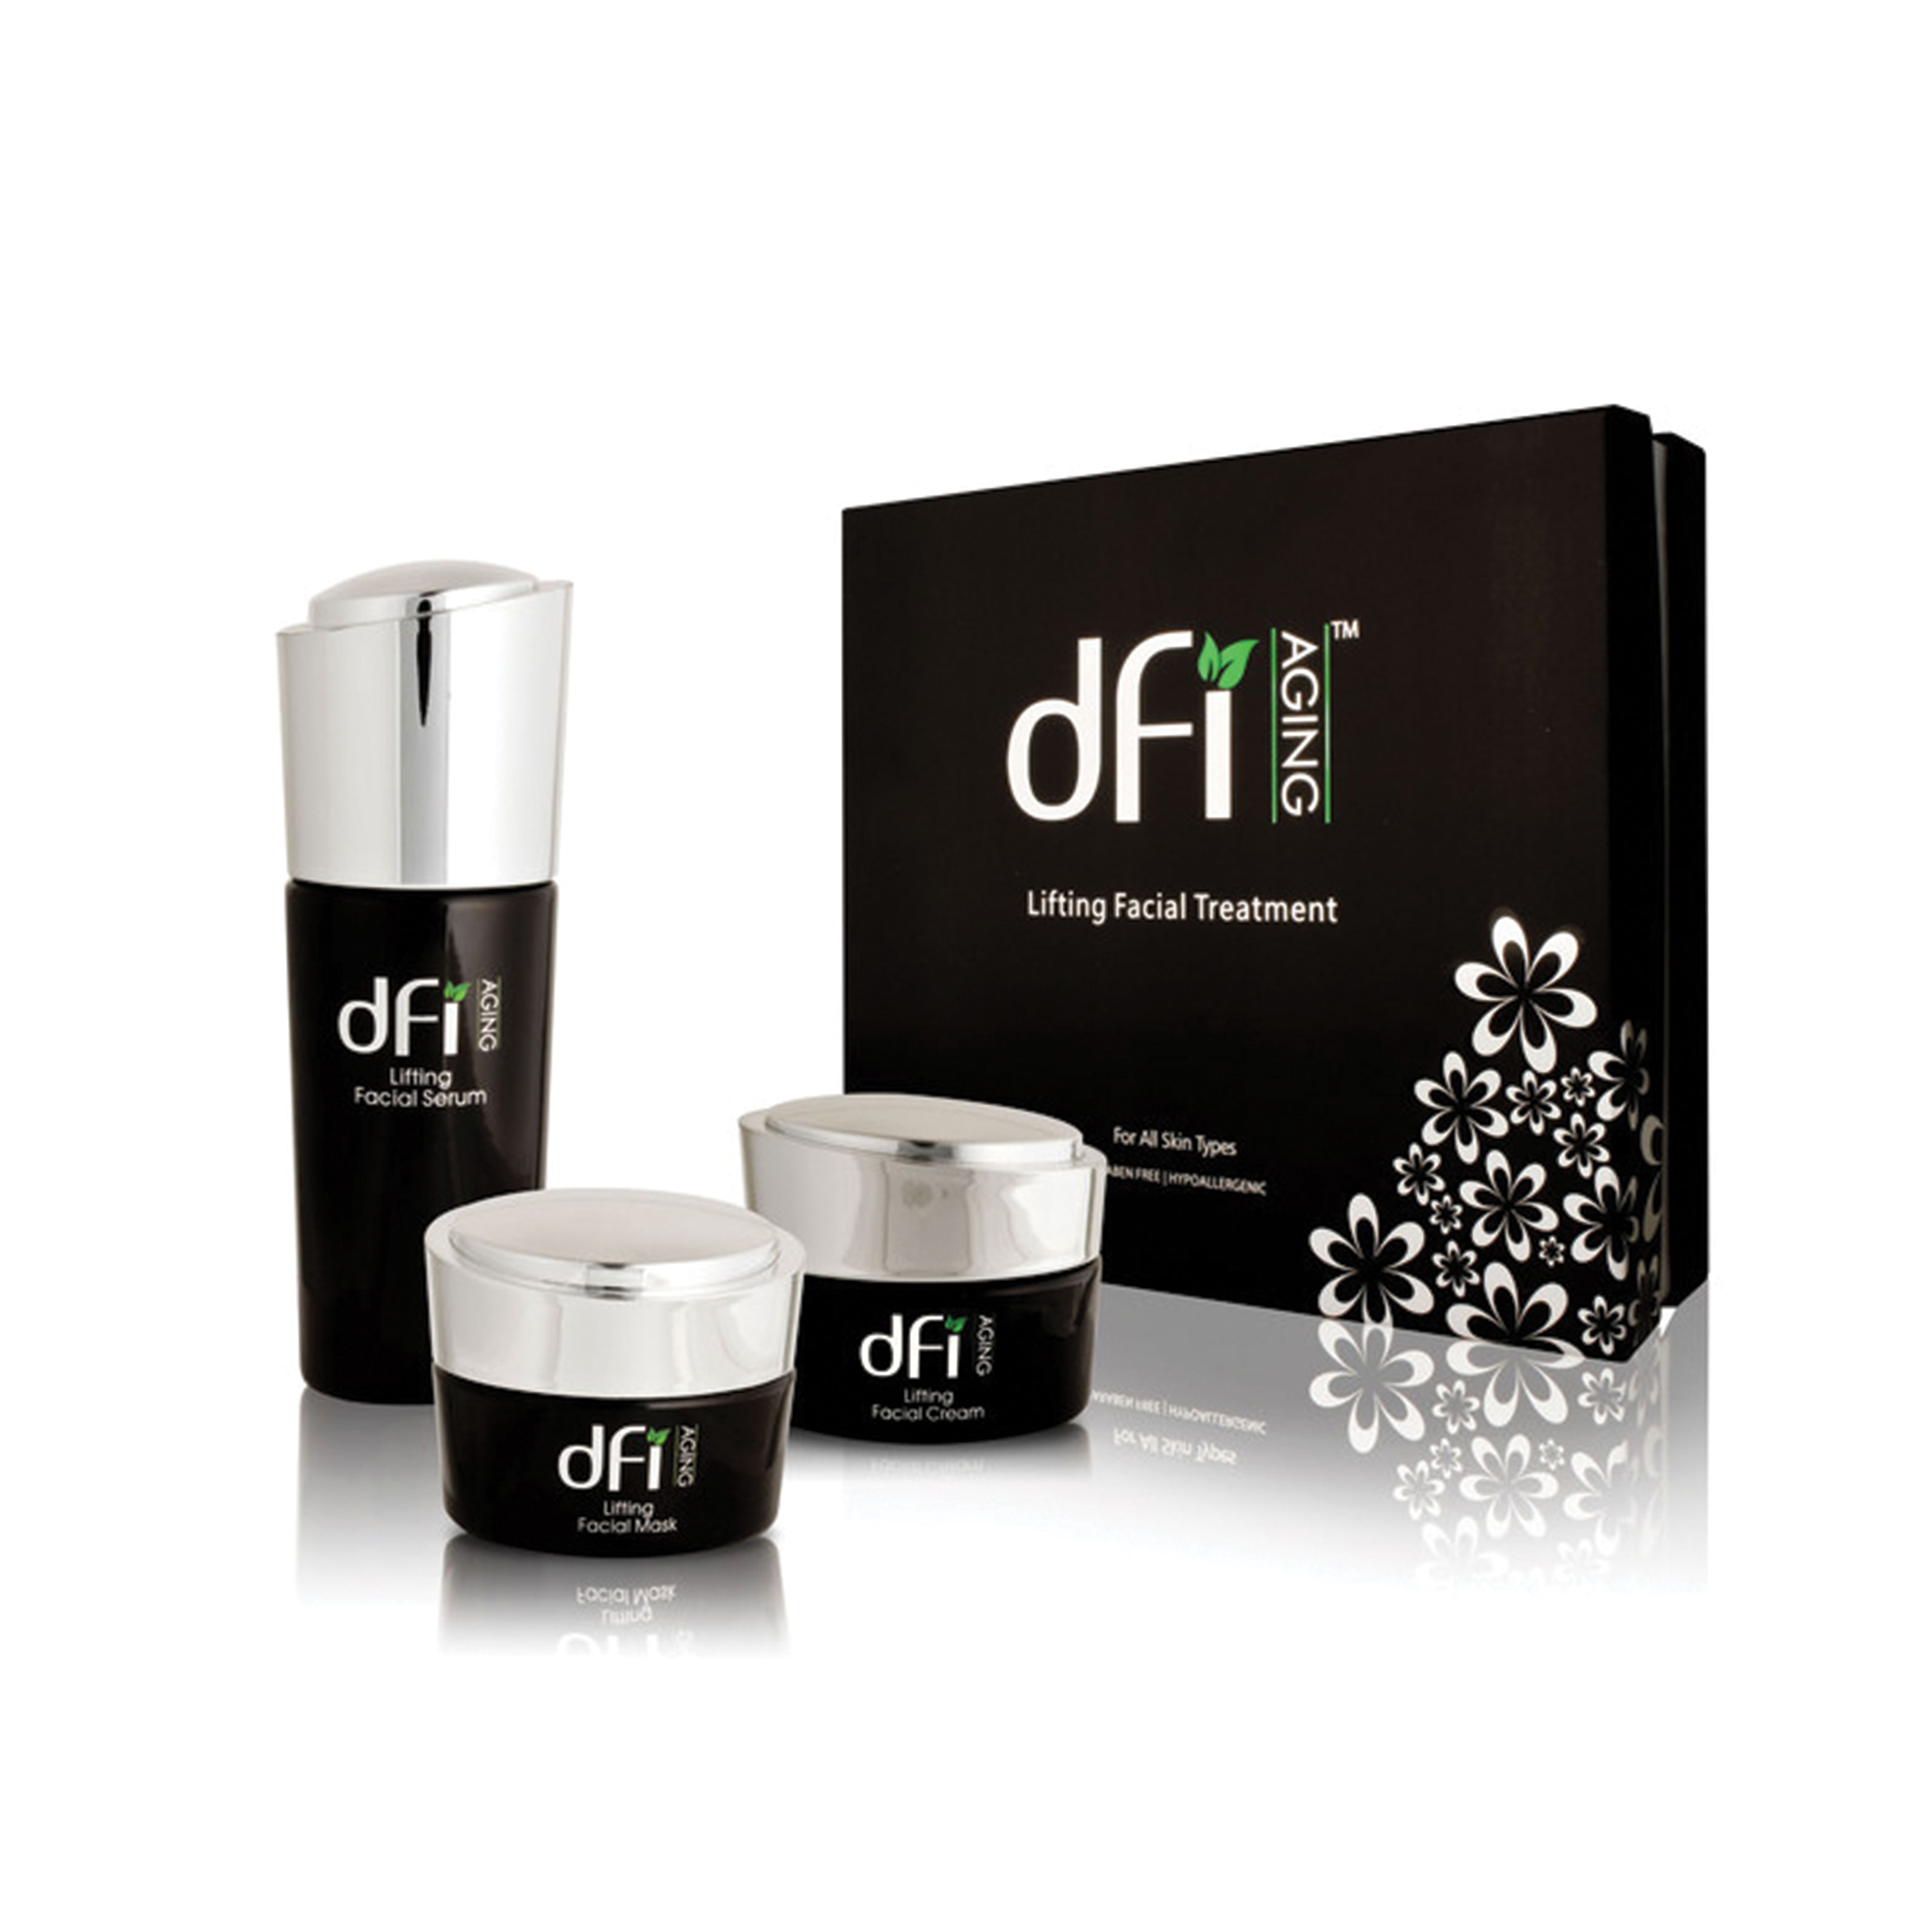 Product Branding and Packaging Design for dfi Aging Skincare's Lifting Facial Treatment